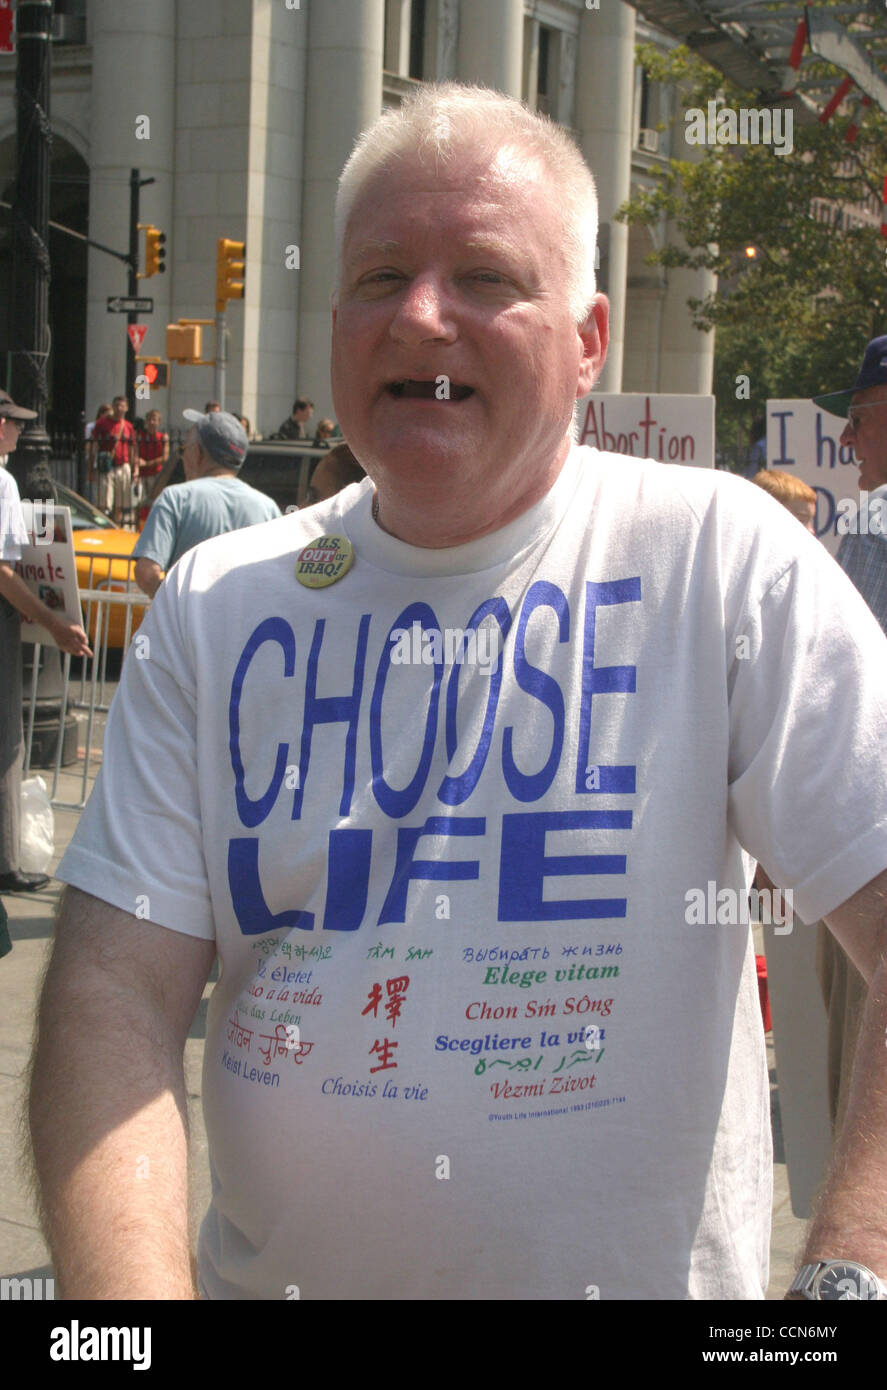 Aug 28, 2004; New York, NY, USA; Anti-abortion protesters hold signs during the Pro-Choice march & rally supporting reproductive rights for women. Stock Photo